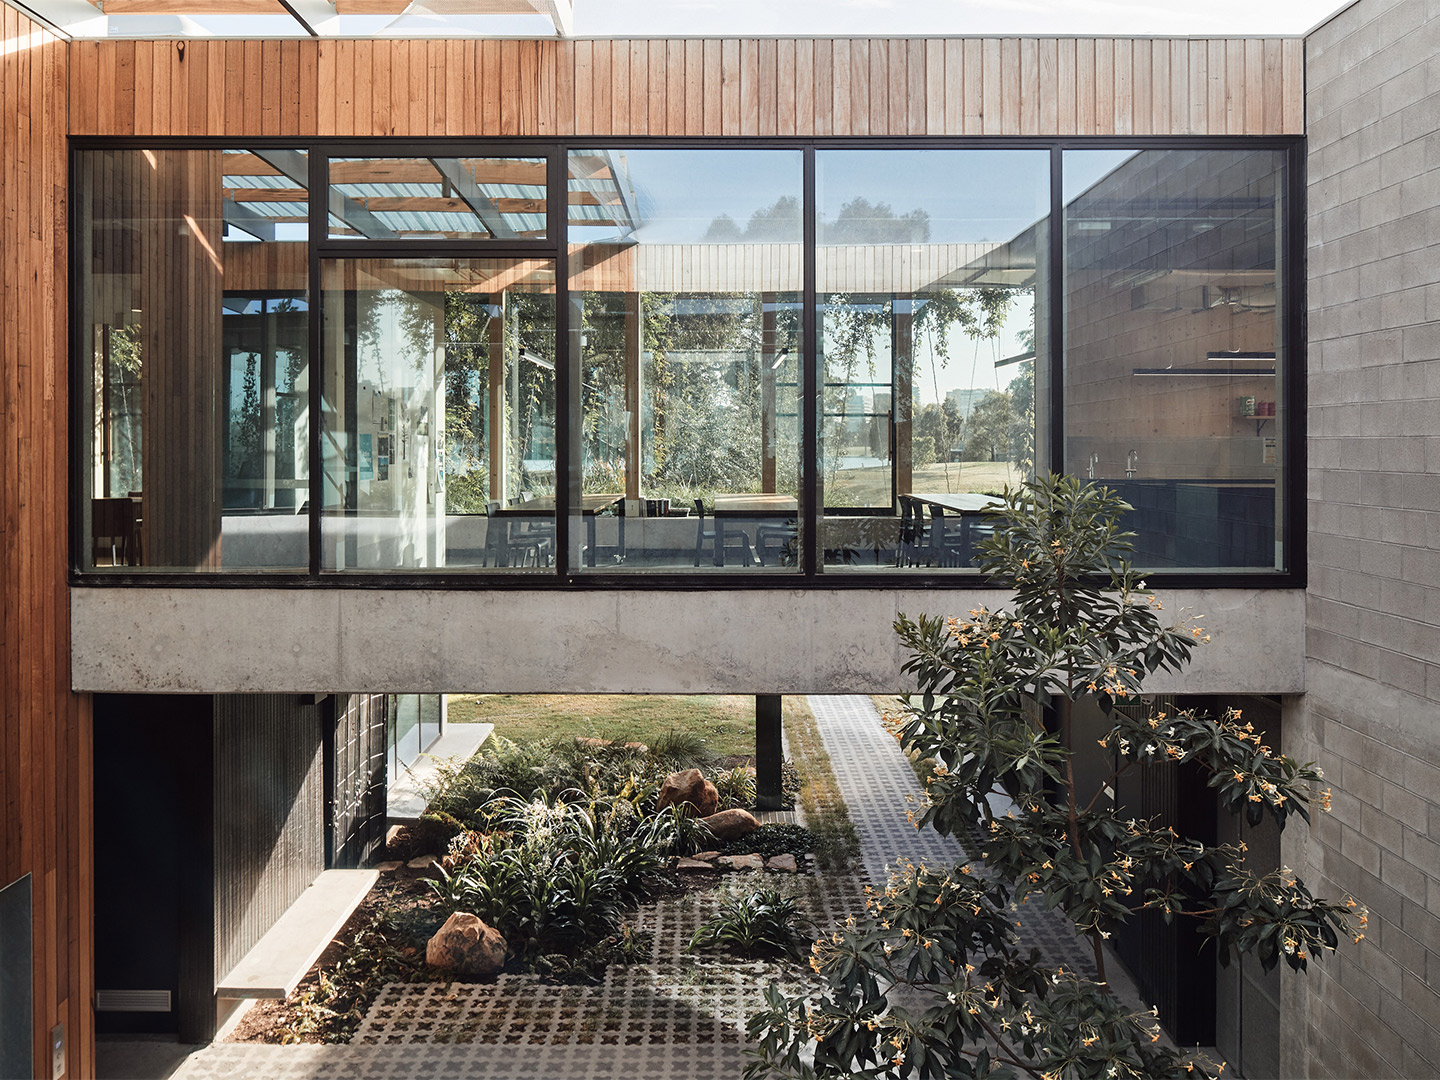 The best garden and landscaping ideas of 2021 have been revealed by the Australian Institute of Landscape Architects. 